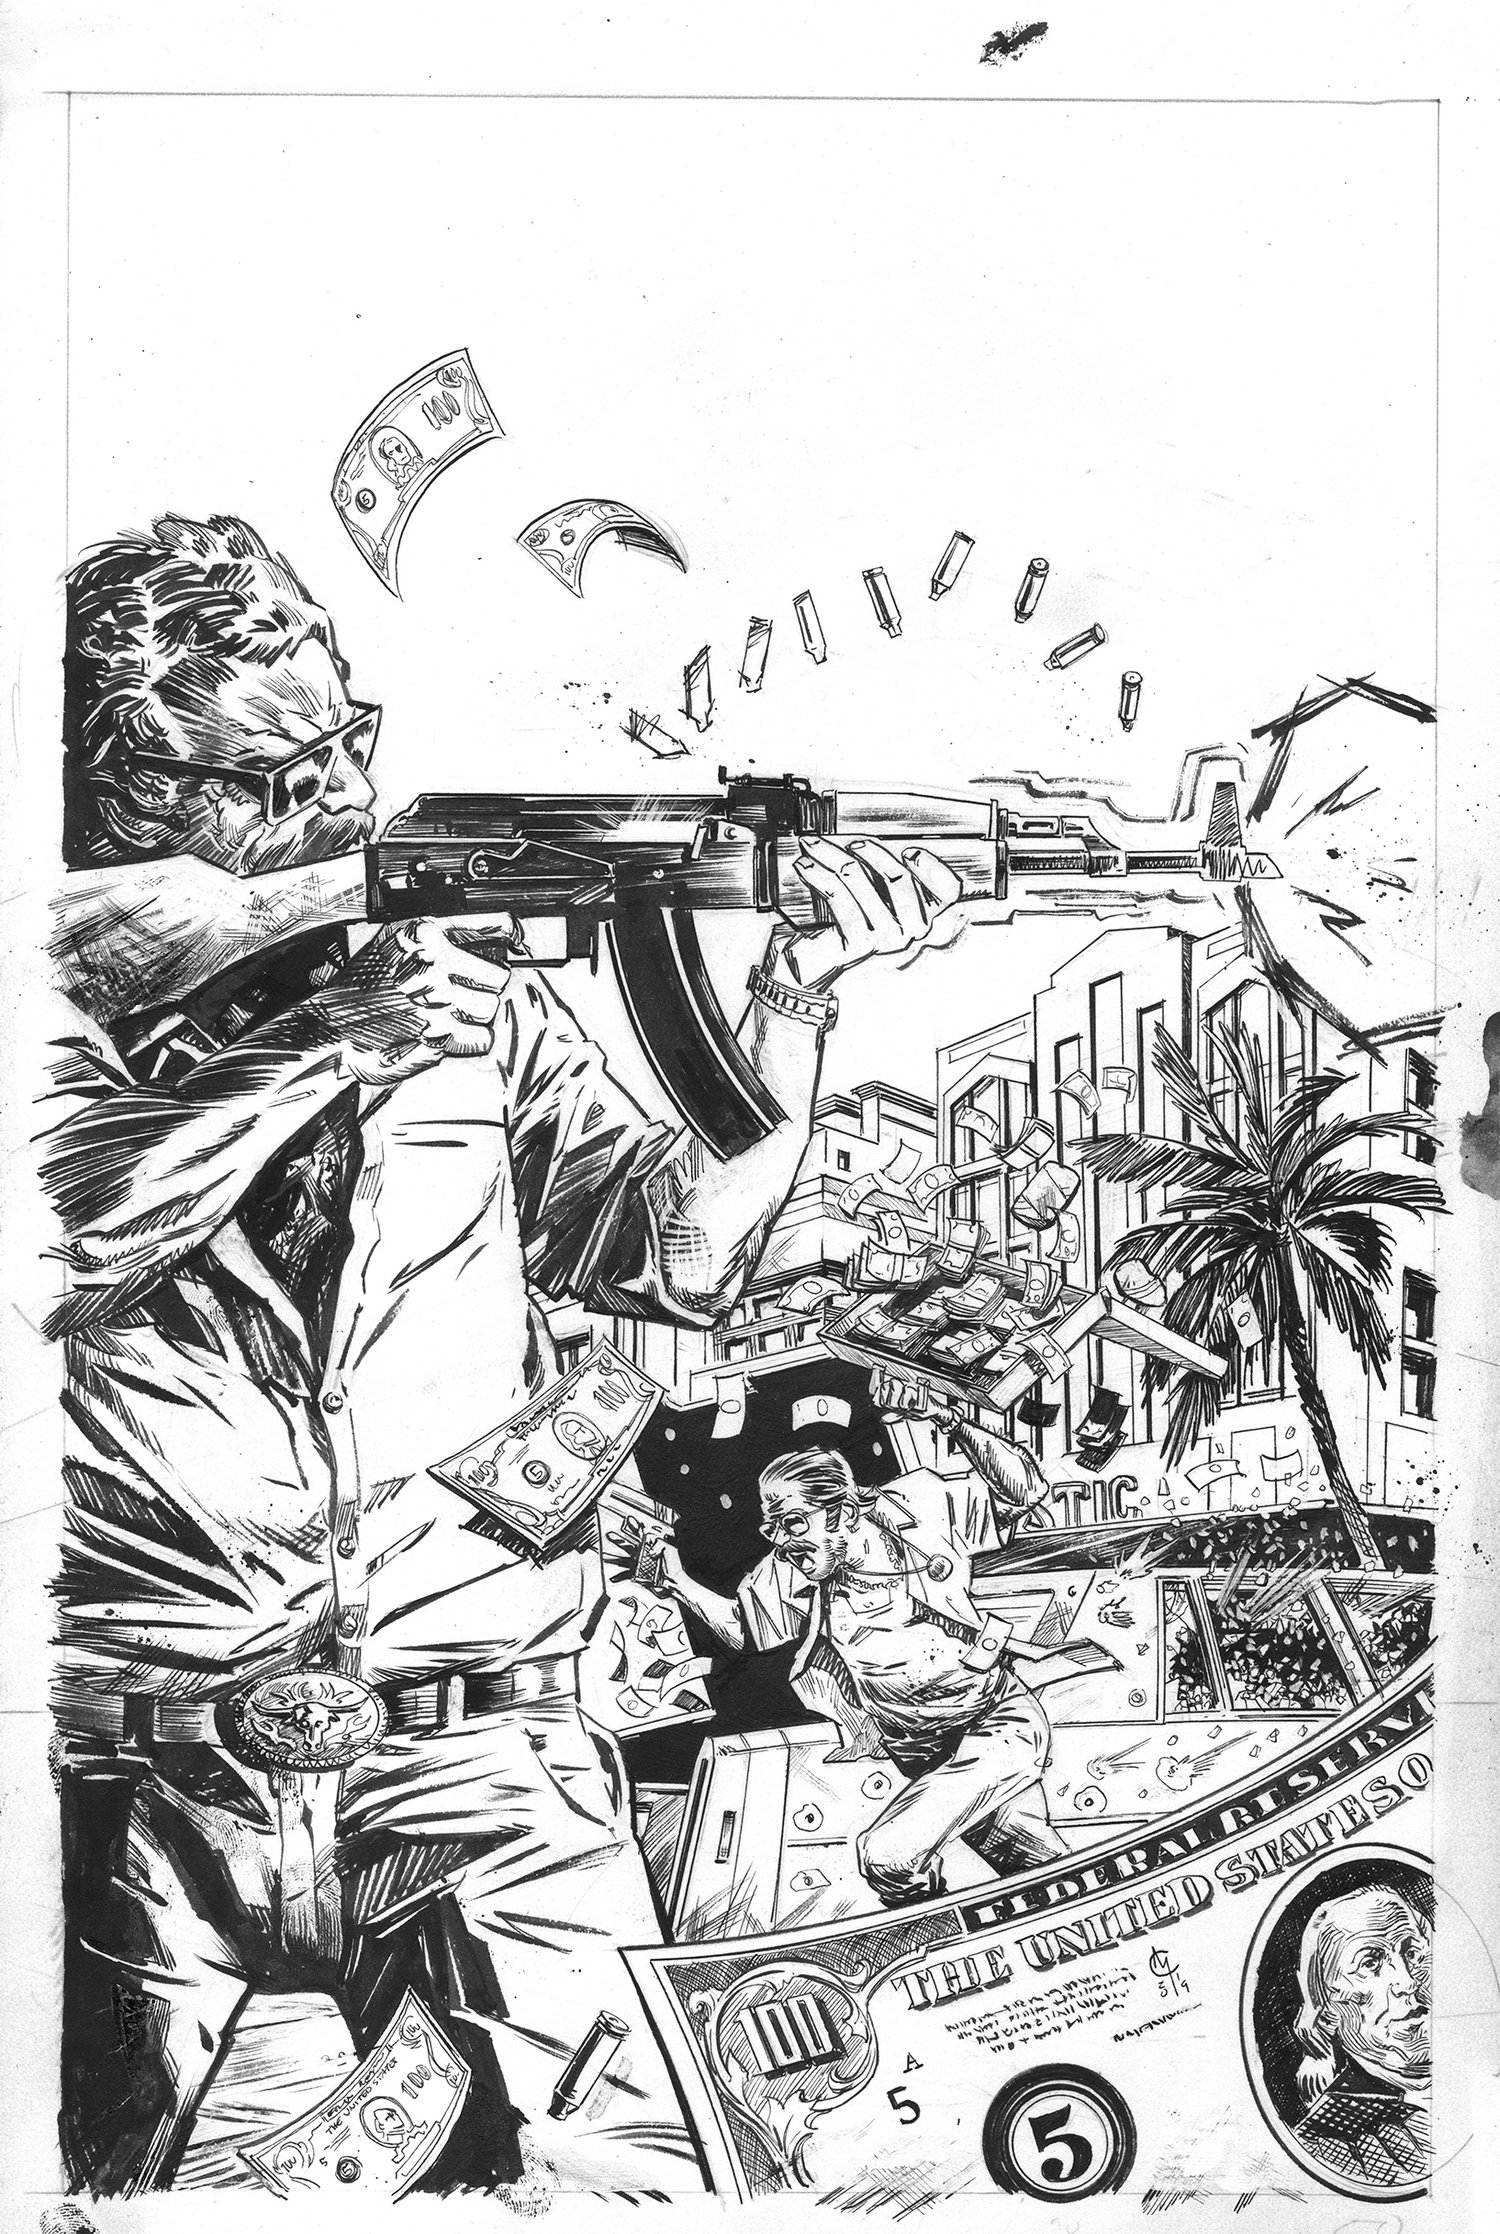 Image of Narcos #2 (IDW) - Variant Cover